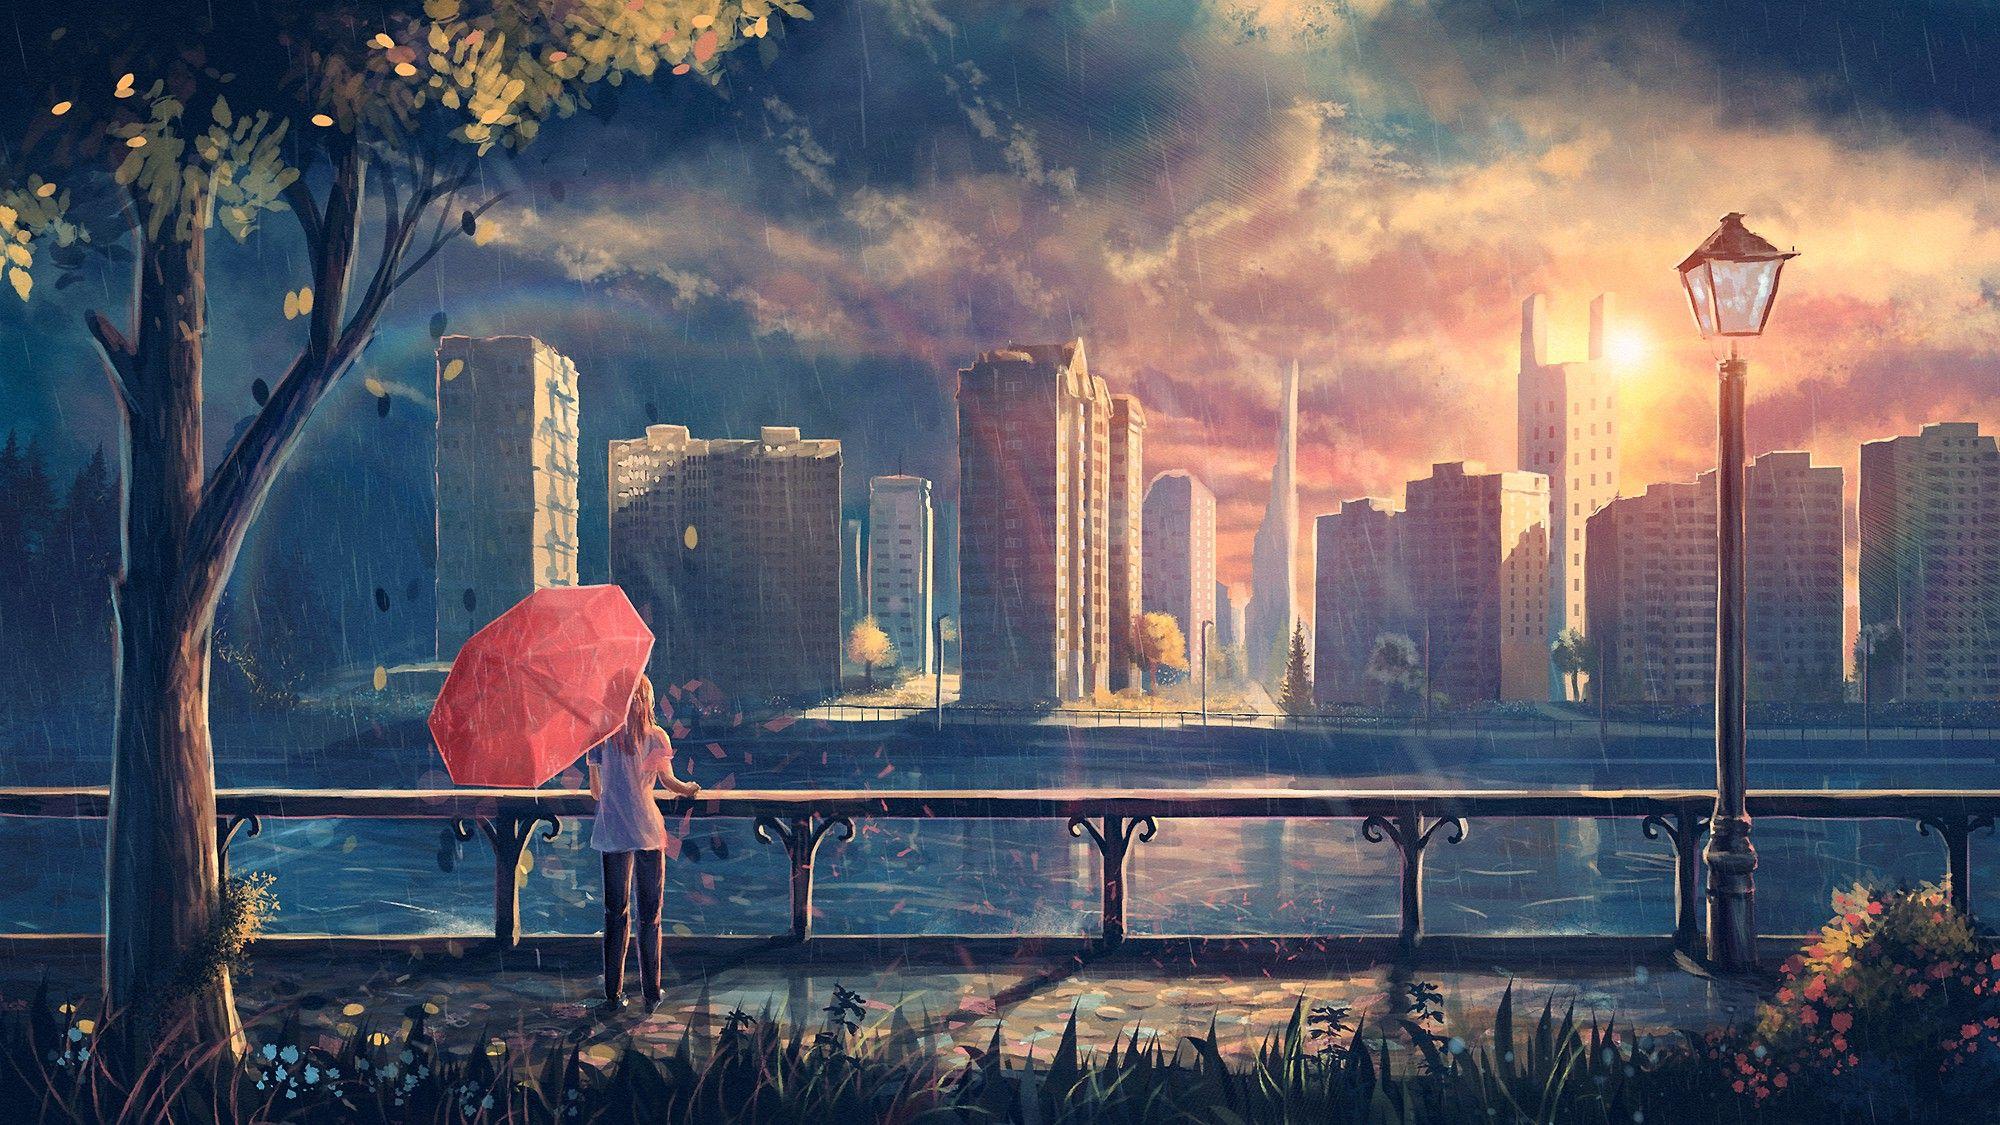 Download wallpaper 1920x1080 rain clouds colorful sky anime girl full  hd hdtv fhd 1080p wallpaper 1920x1080 hd background 3204